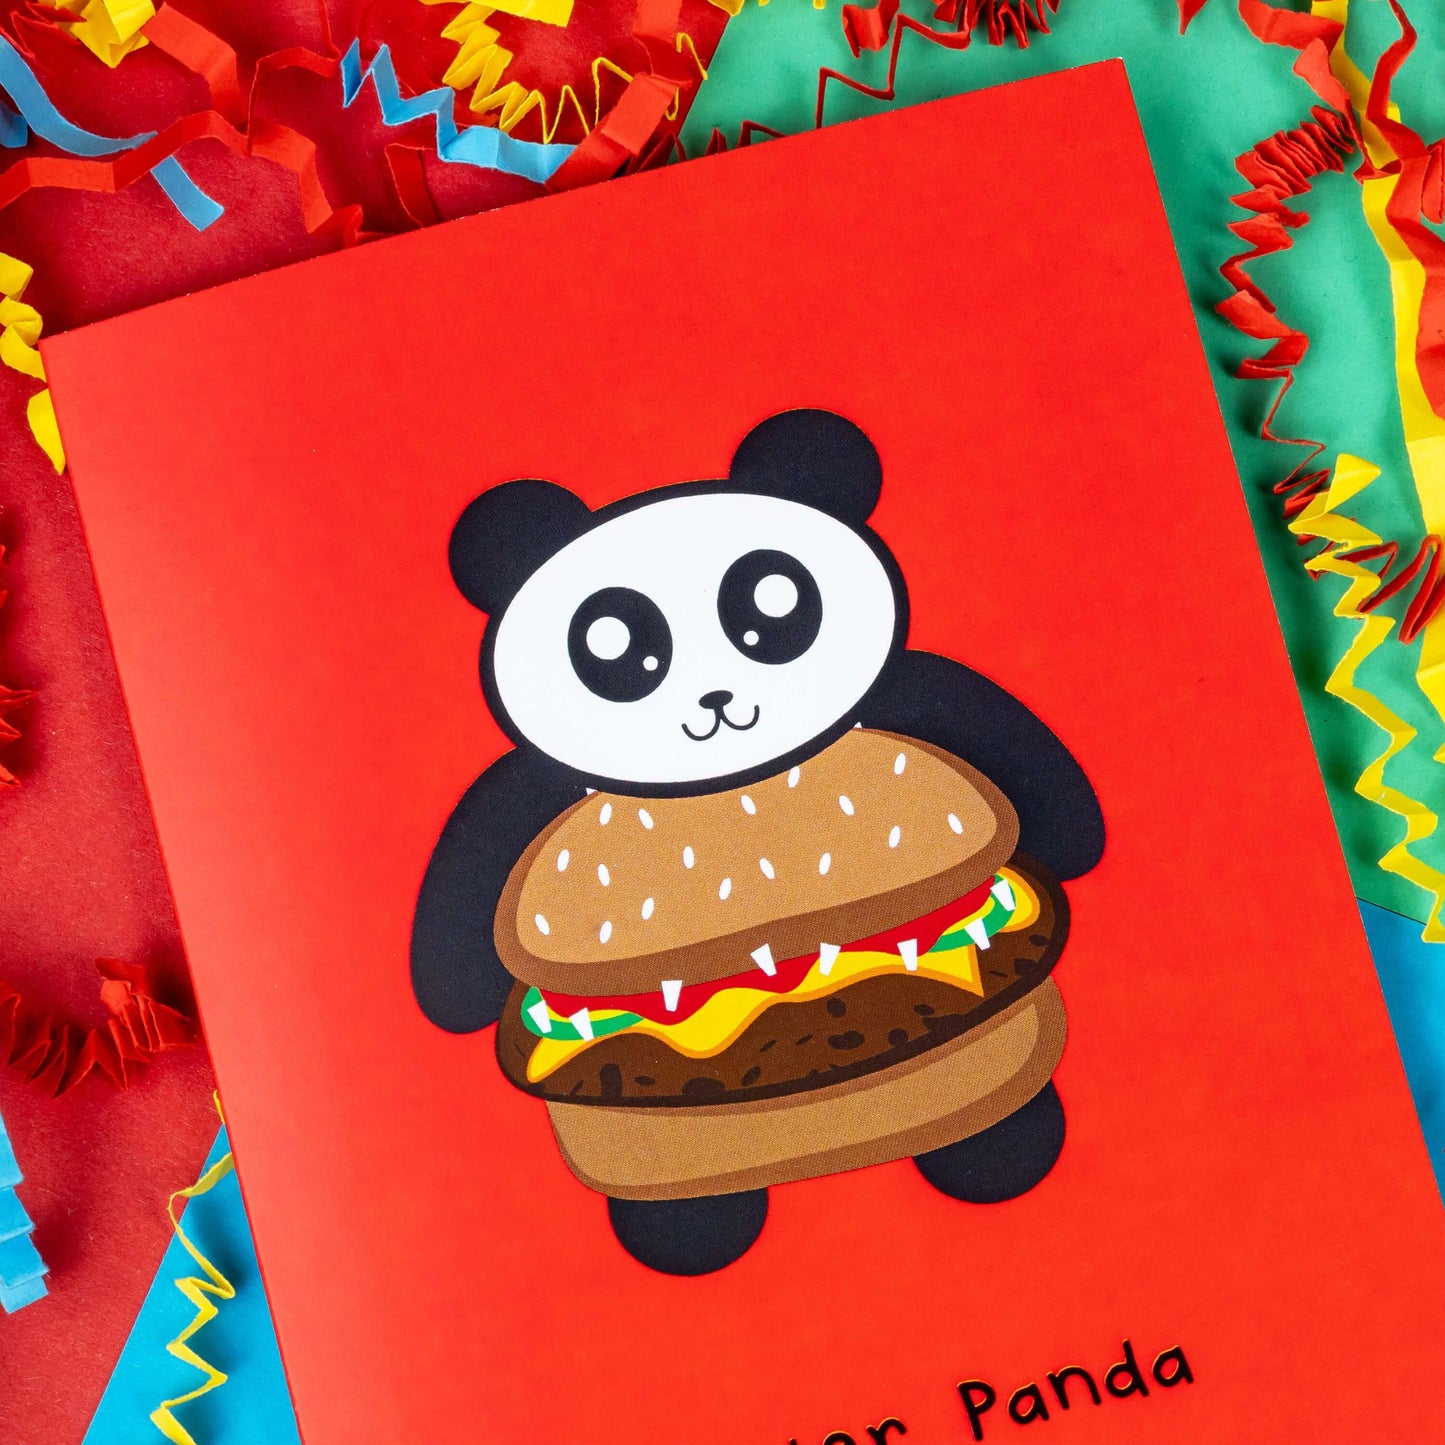 The Quarter Panda Burger Card on a red, blue and green background with yellow, red and blue crinkle card confetti. The red a6 greeting card has a smiling panda with its body being a seeded bun burger. Underneath in black reads 'quarter panda'.